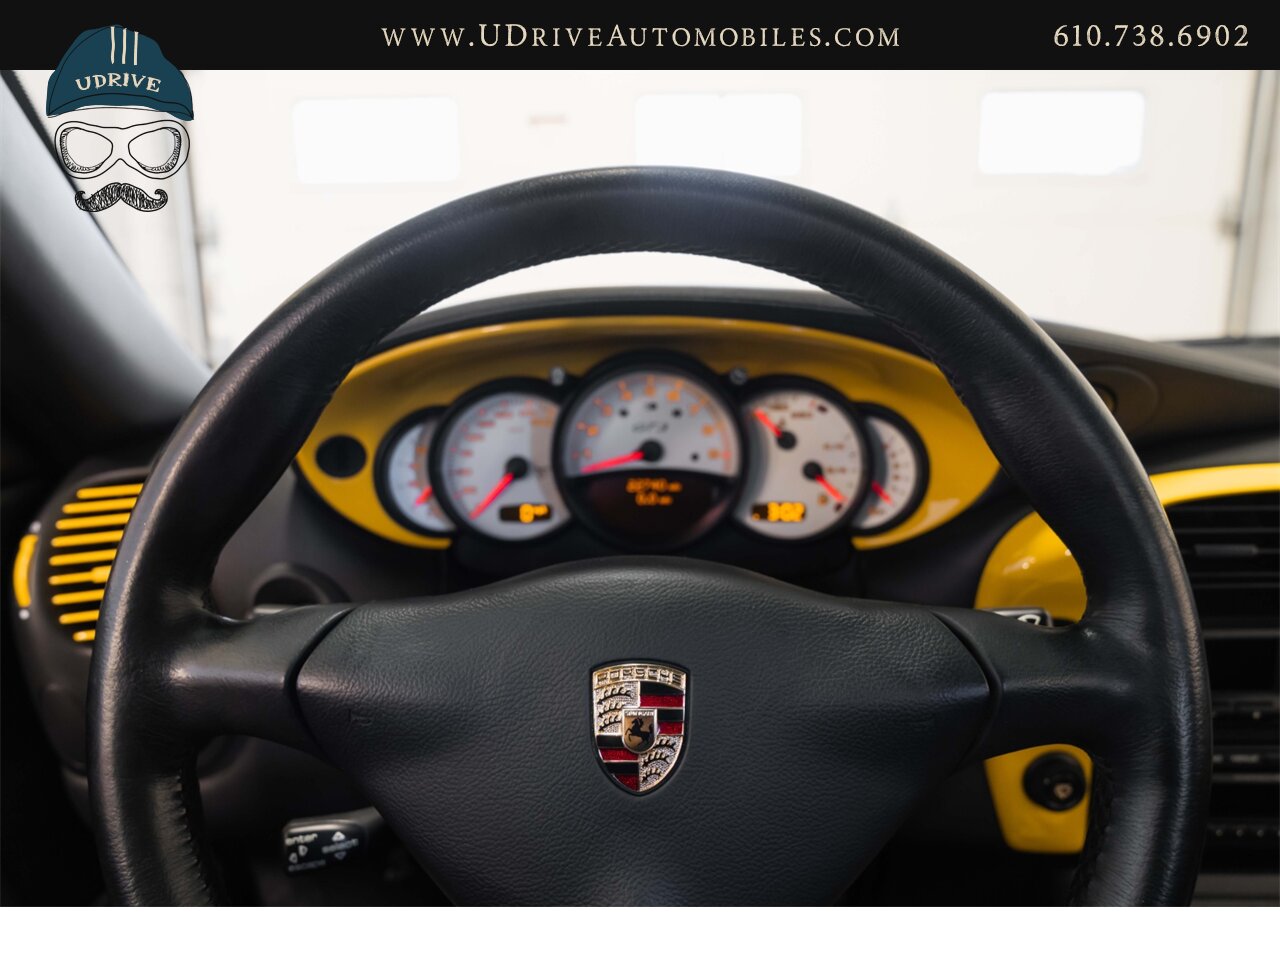 2005 Porsche 911 GT3 996 Speed Yellow Sport Seats Pntd Hardbacks  Pntd Console Deviating Stitch Yellow Accents Throughout - Photo 40 - West Chester, PA 19382